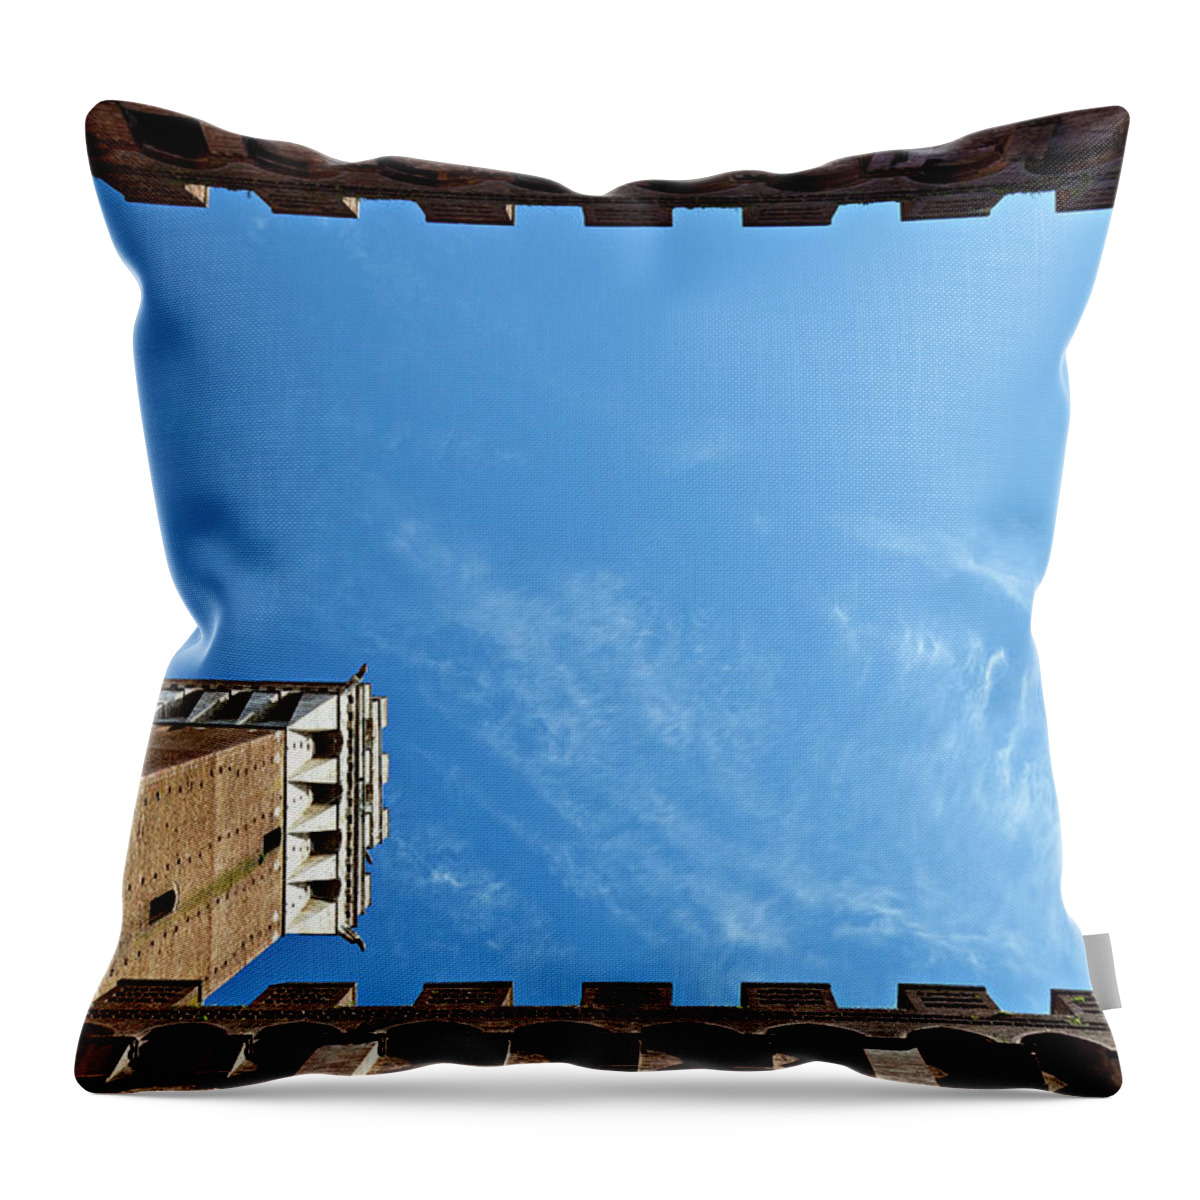 Tranquility Throw Pillow featuring the photograph Postage Stamp With The Torre Del Mangia by Danilo Antonini Www.flickr.com/photos/danilo antonini